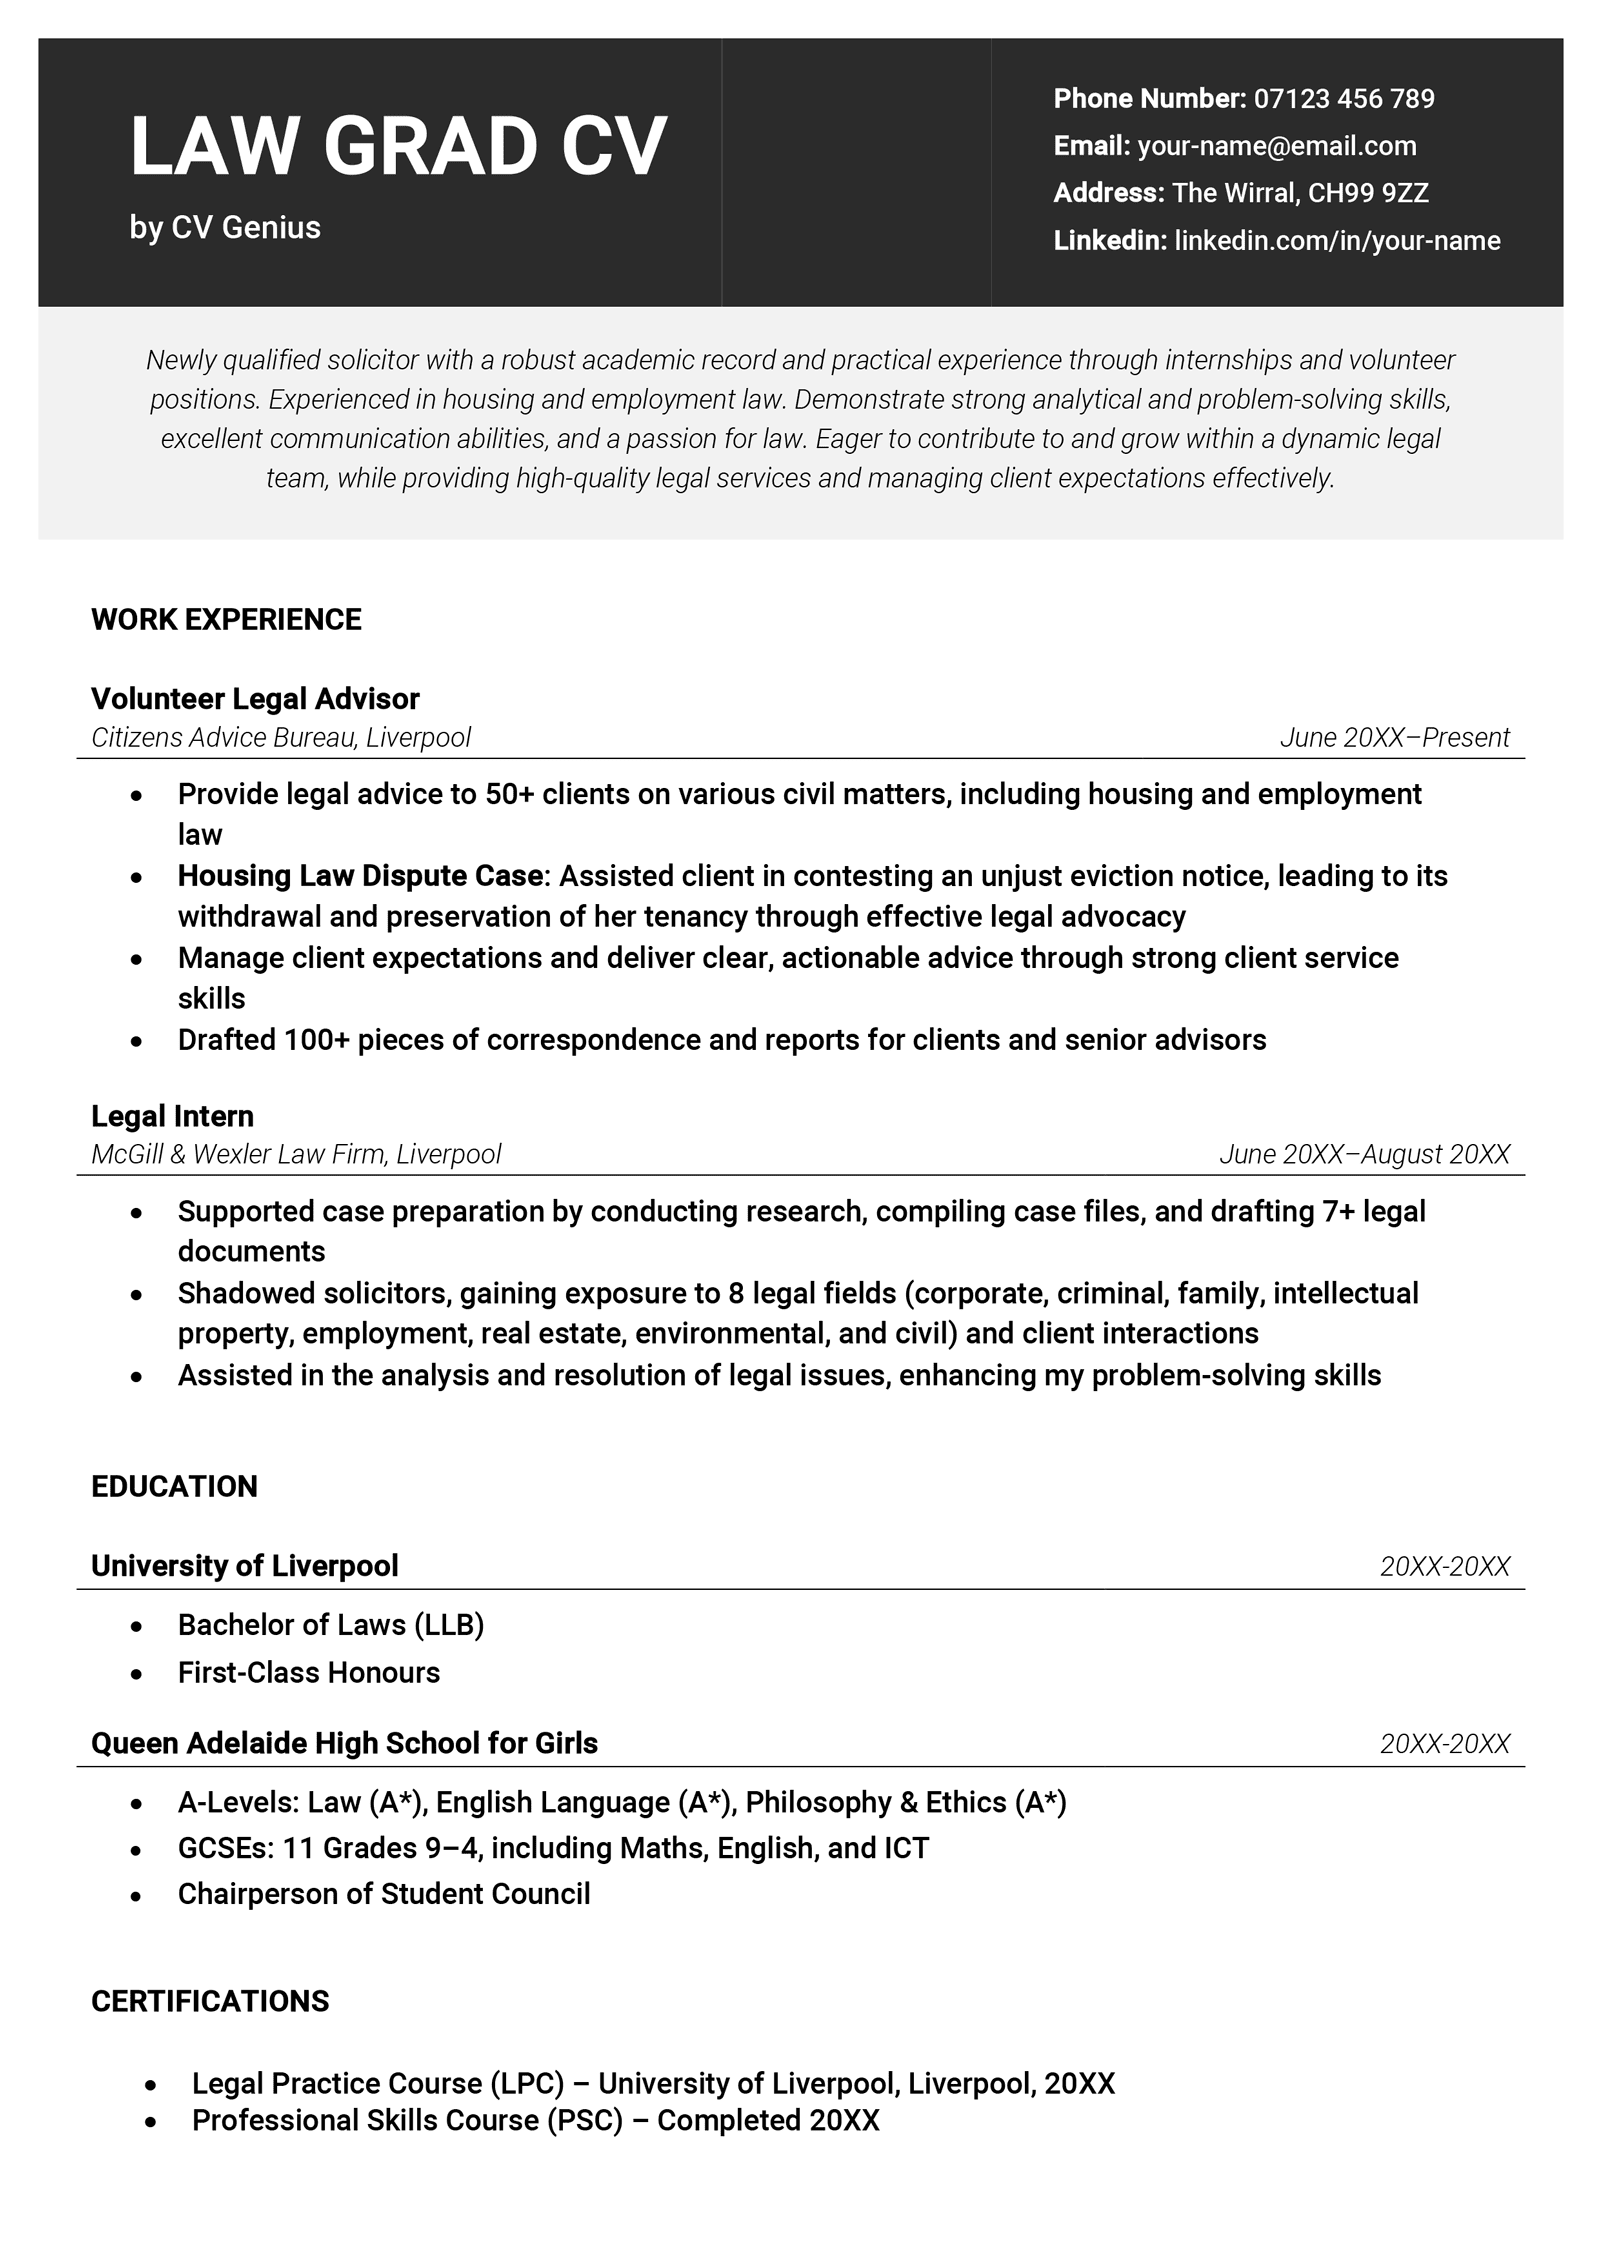 A sober CV design used for a law graduate CV example which outlines both volunteer work and internships related to law.